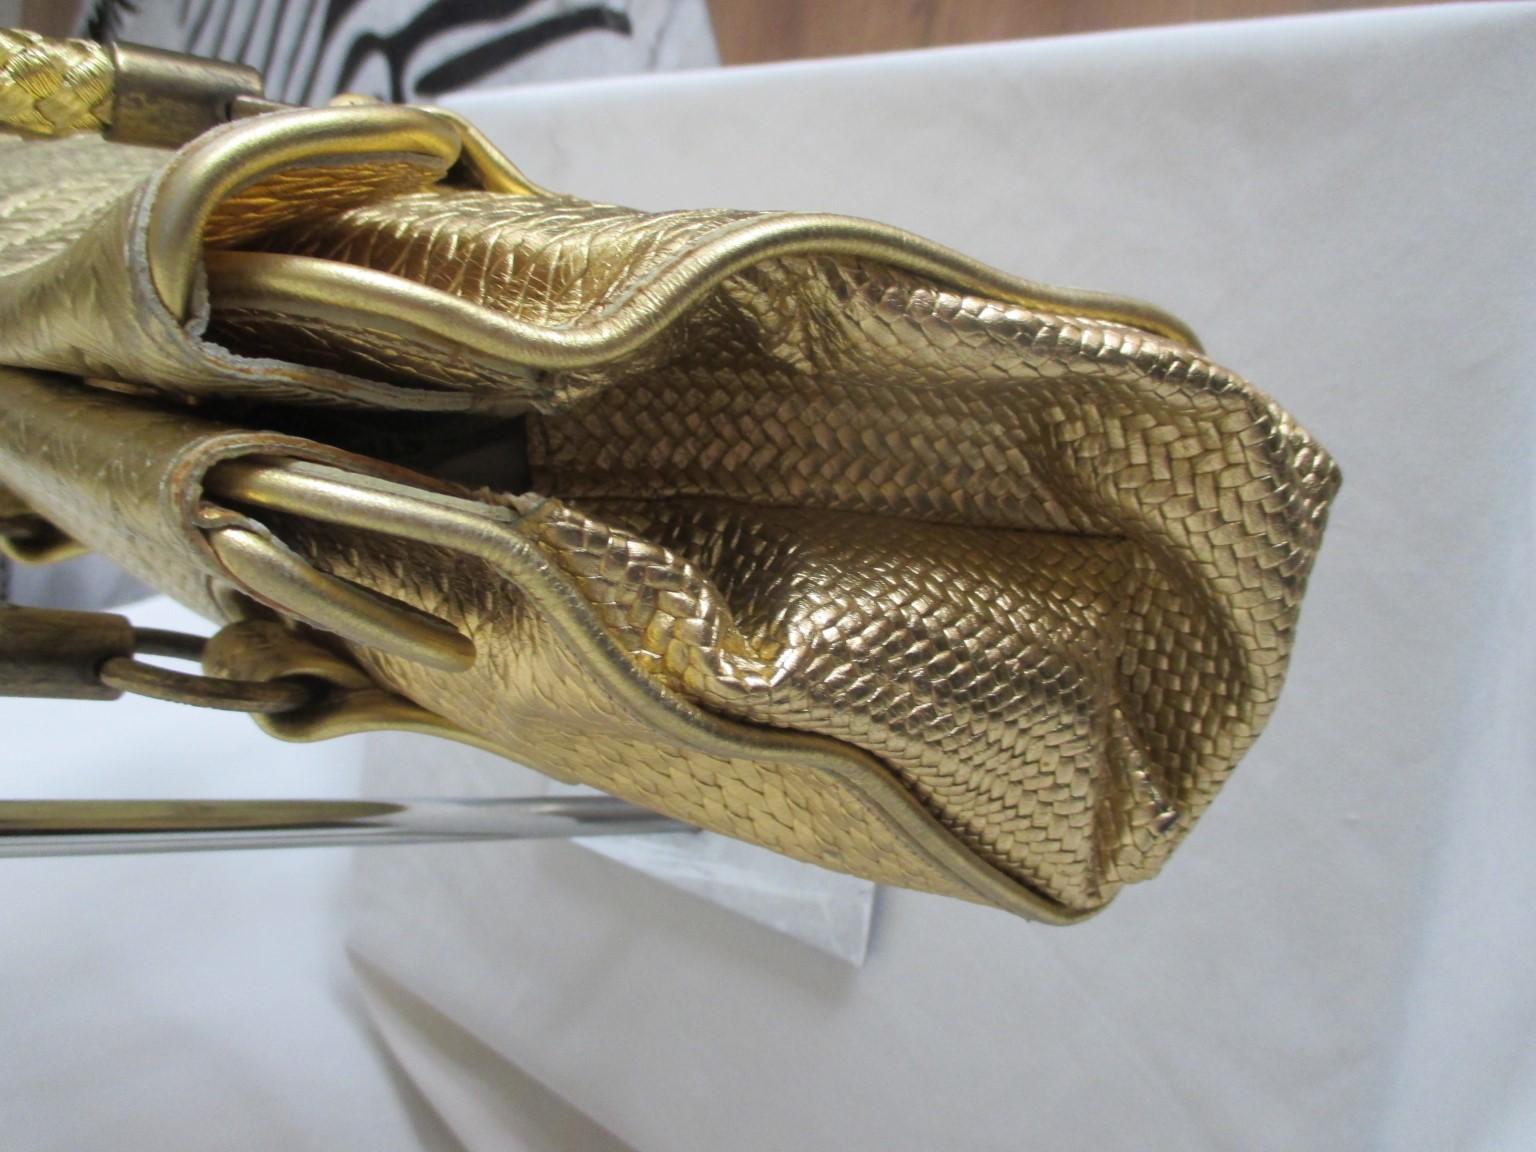 Roberto Cavalli Gold Baguette Bag In Good Condition For Sale In Amsterdam, NL